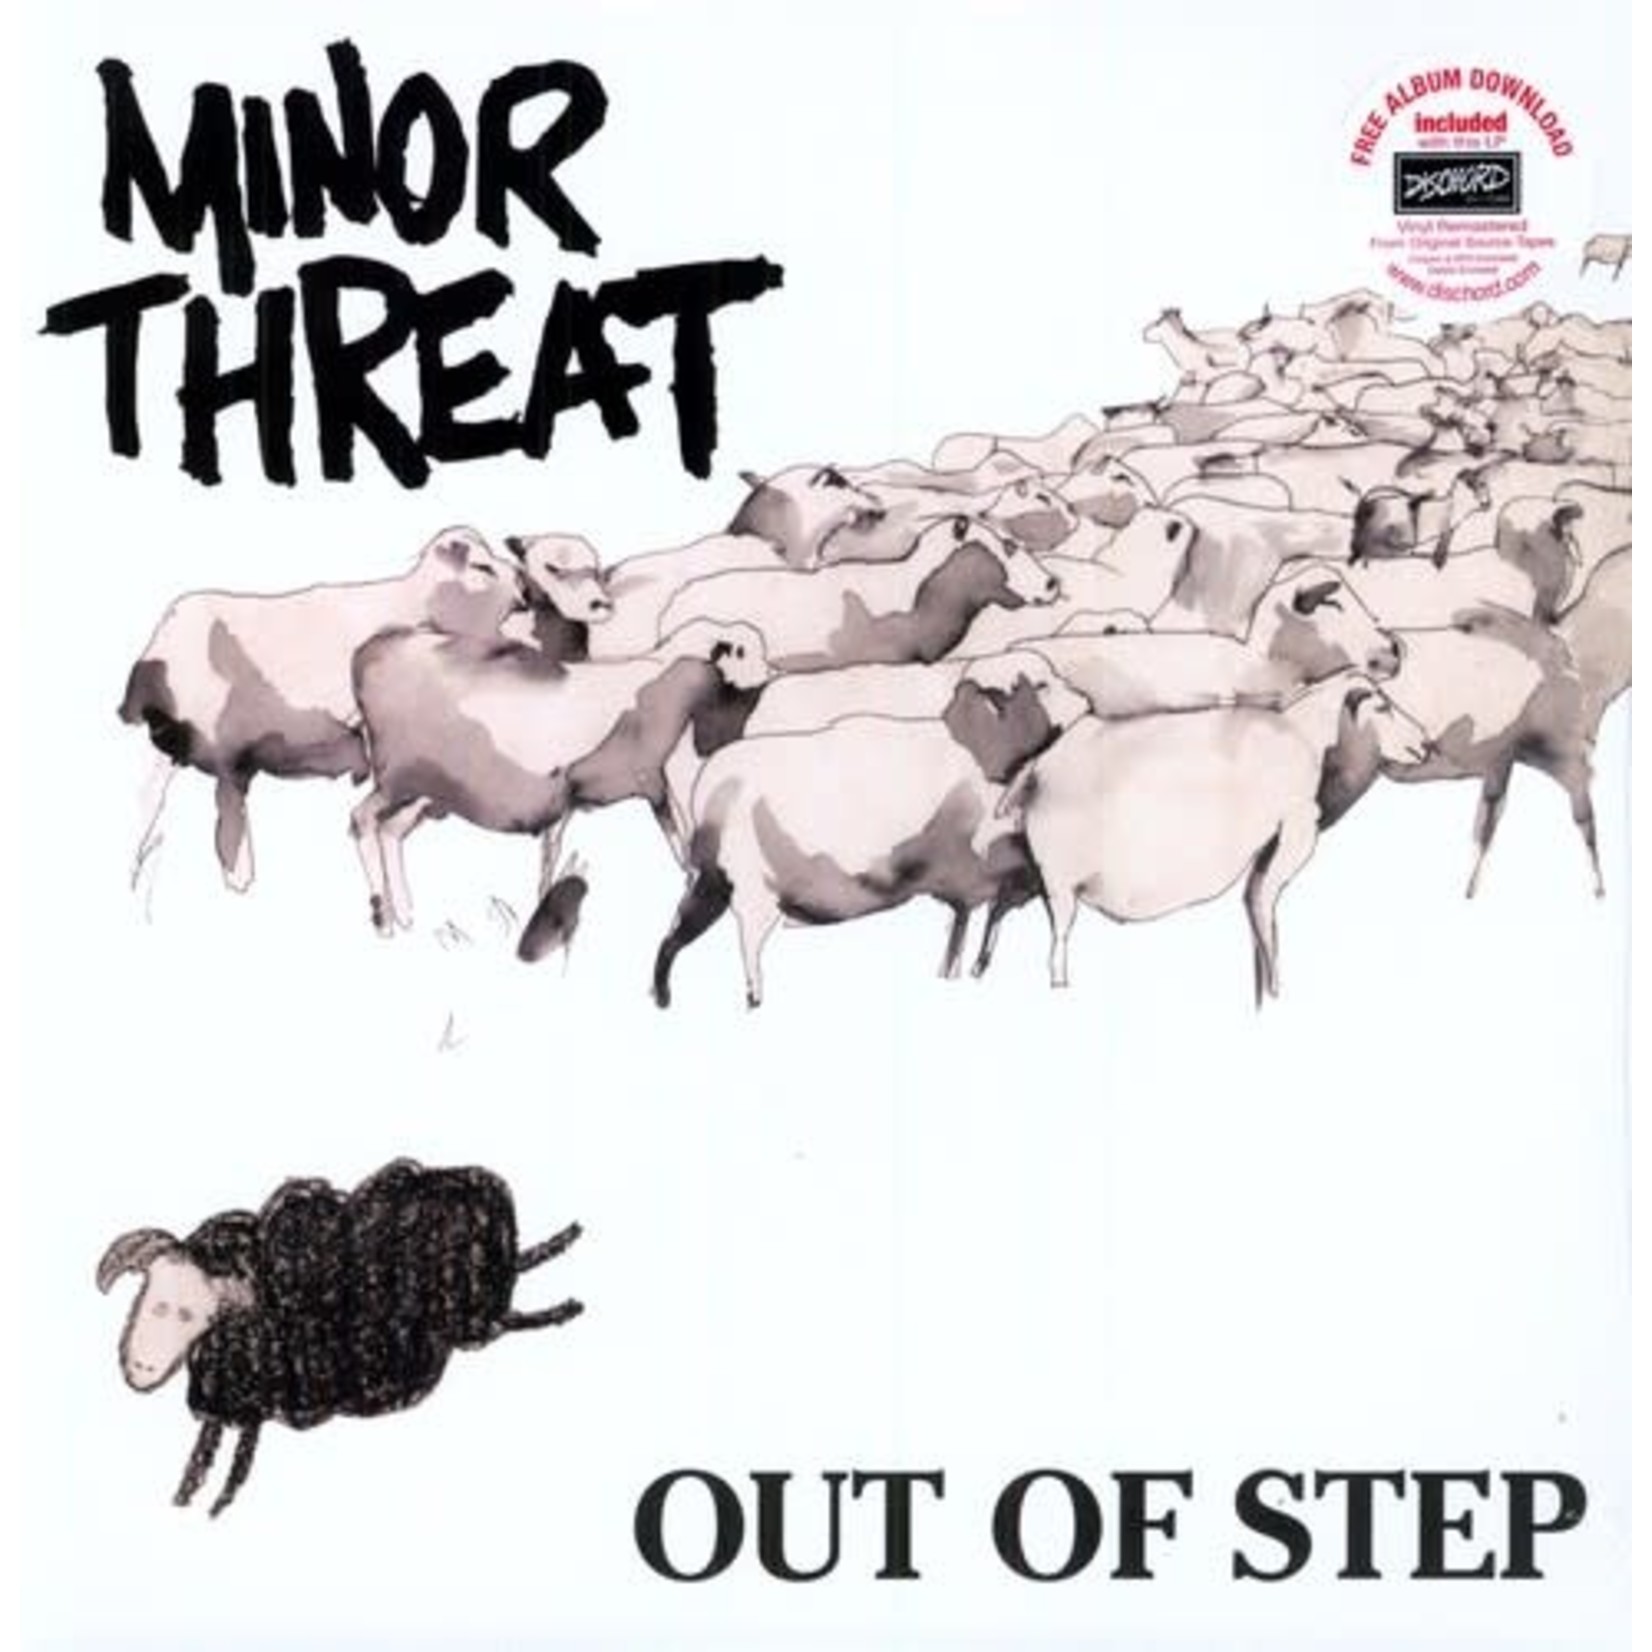 Minor Threat - Out Of Step [LP]